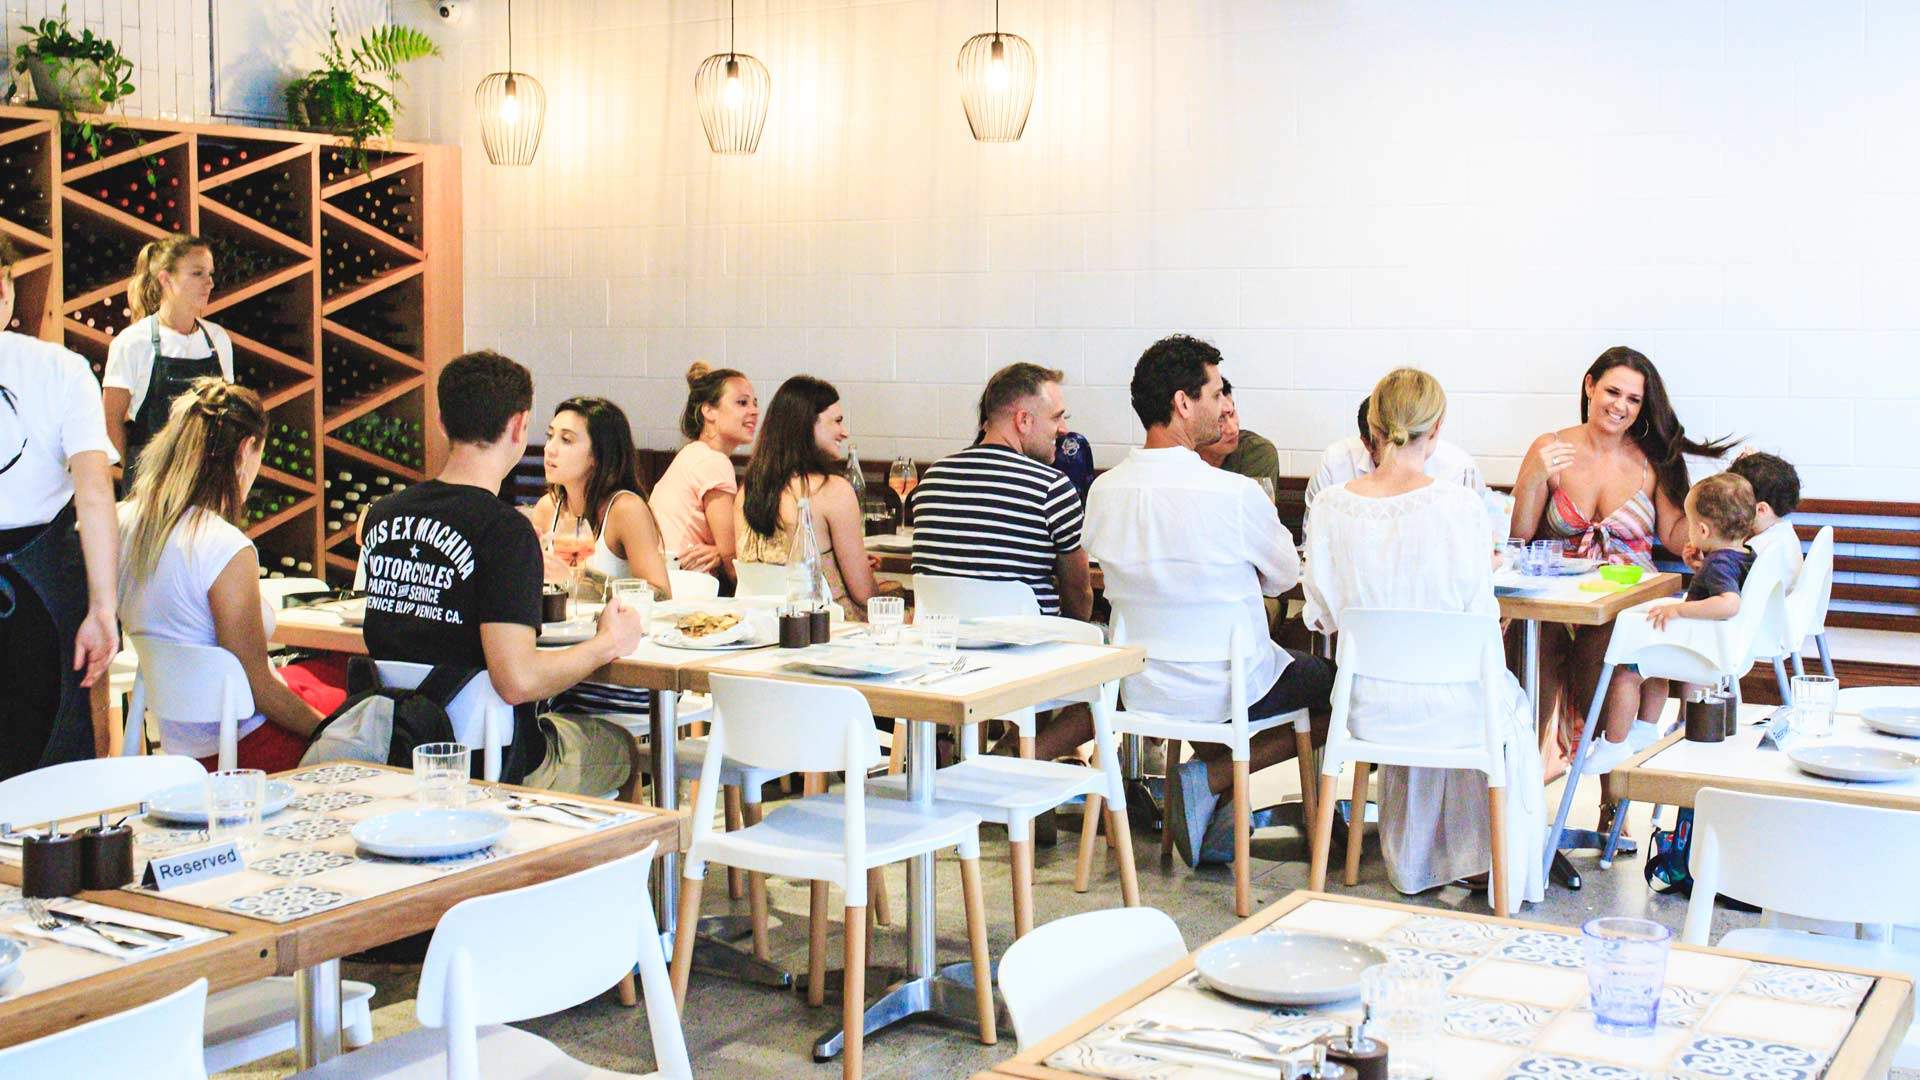 Salt Meats Cheese Has Opened Its First Italian Restaurant on the Northern Beaches